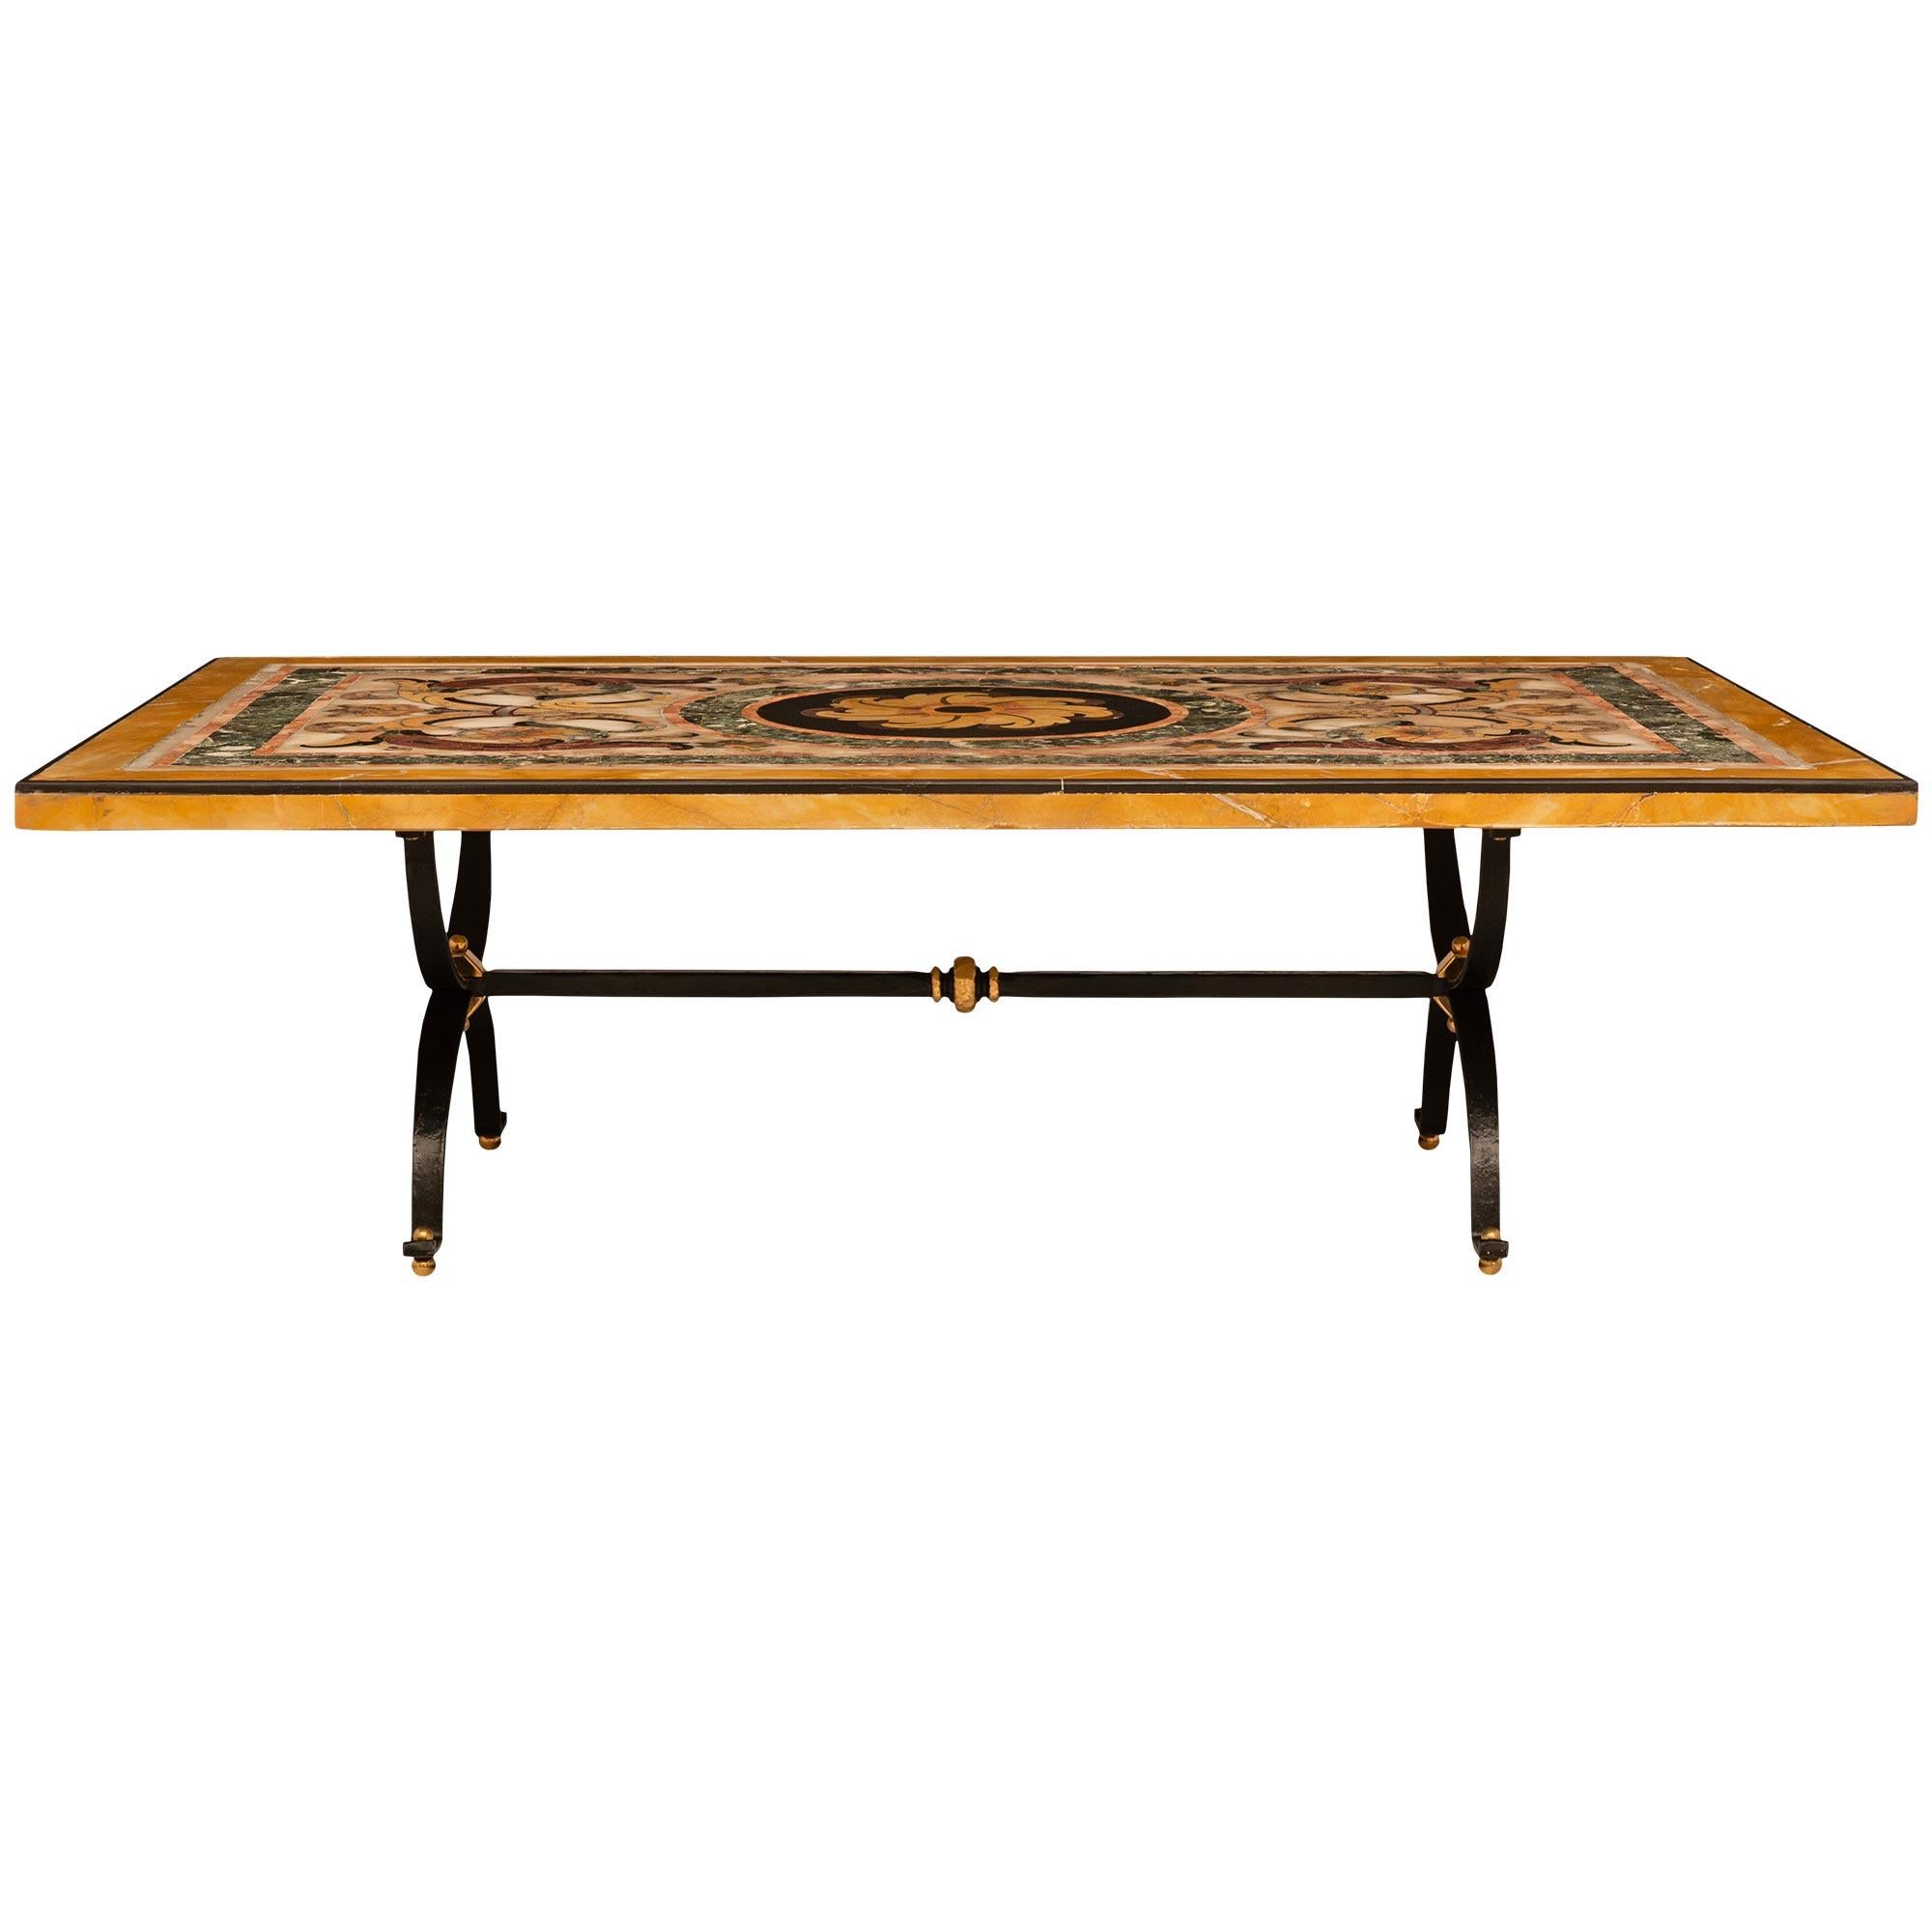 Italian 18th Century Pietra Dura Marble, Wrought Iron And Brass Coffee Table For Sale 6